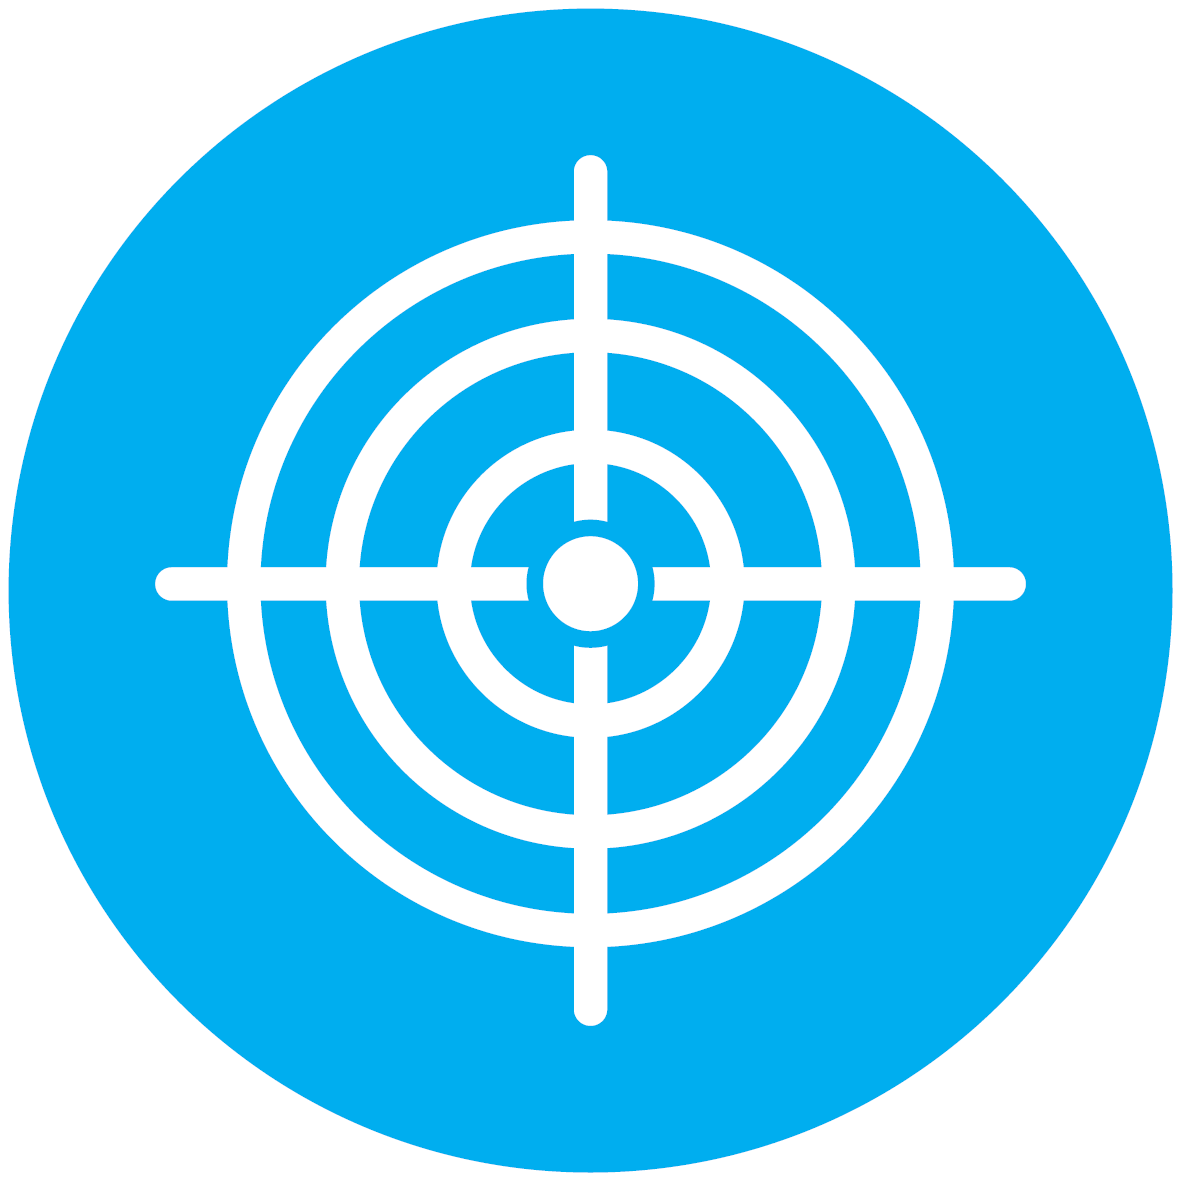 A target icon.